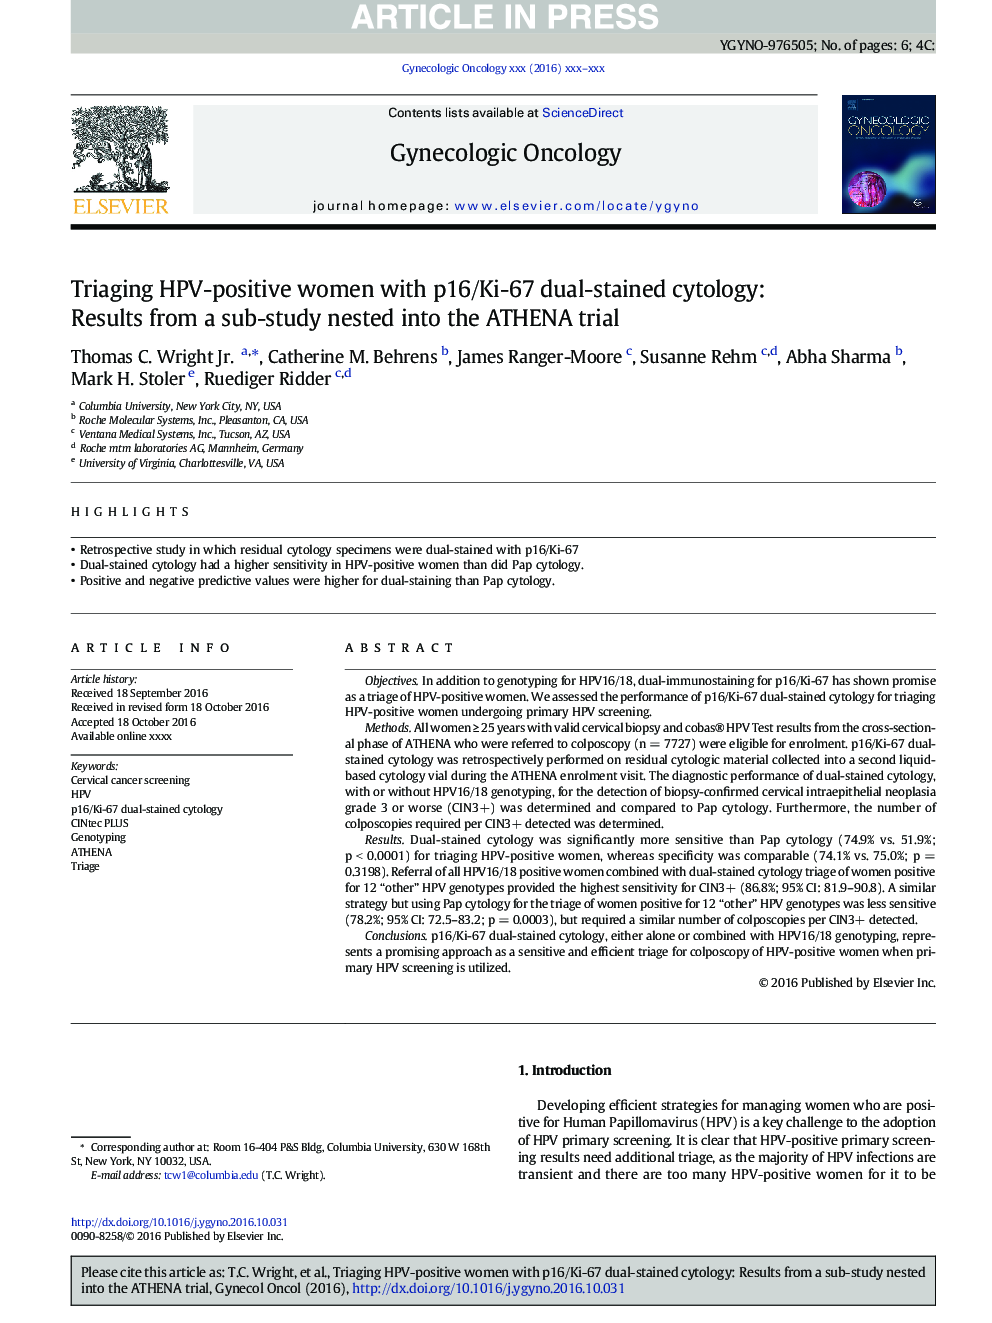 Triaging HPV-positive women with p16/Ki-67 dual-stained cytology: Results from a sub-study nested into the ATHENA trial